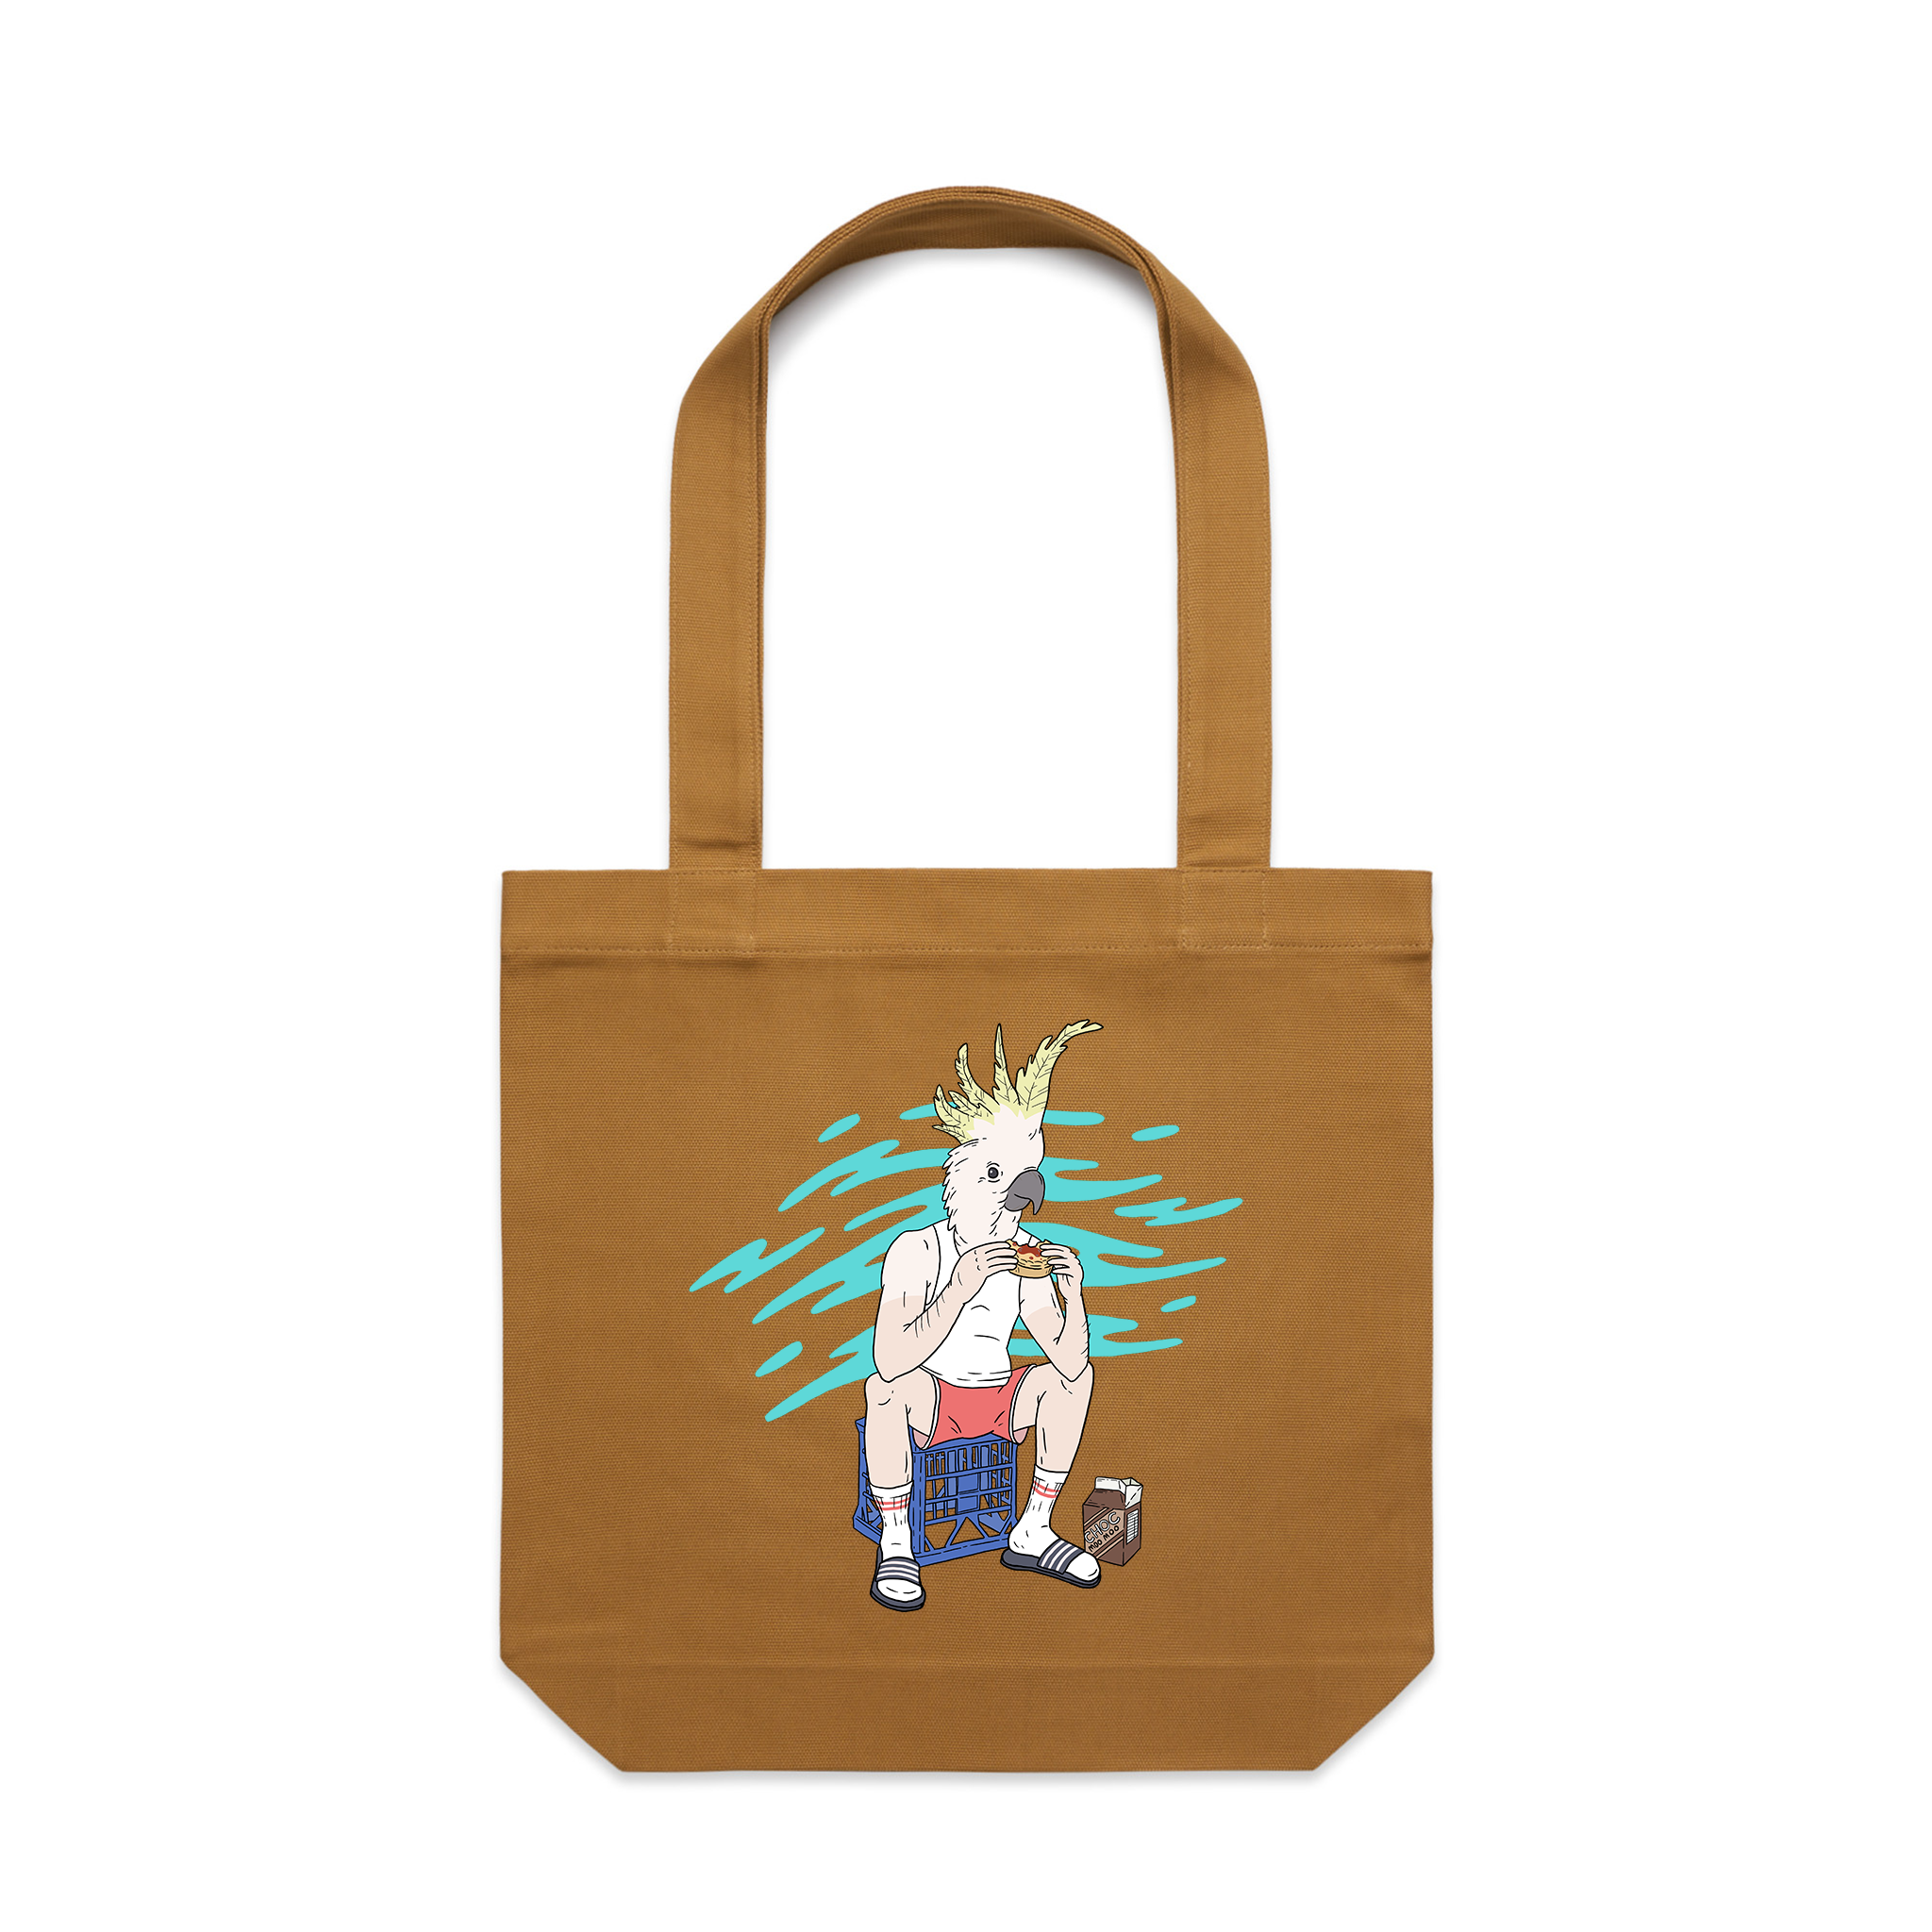 This Is Living Tote